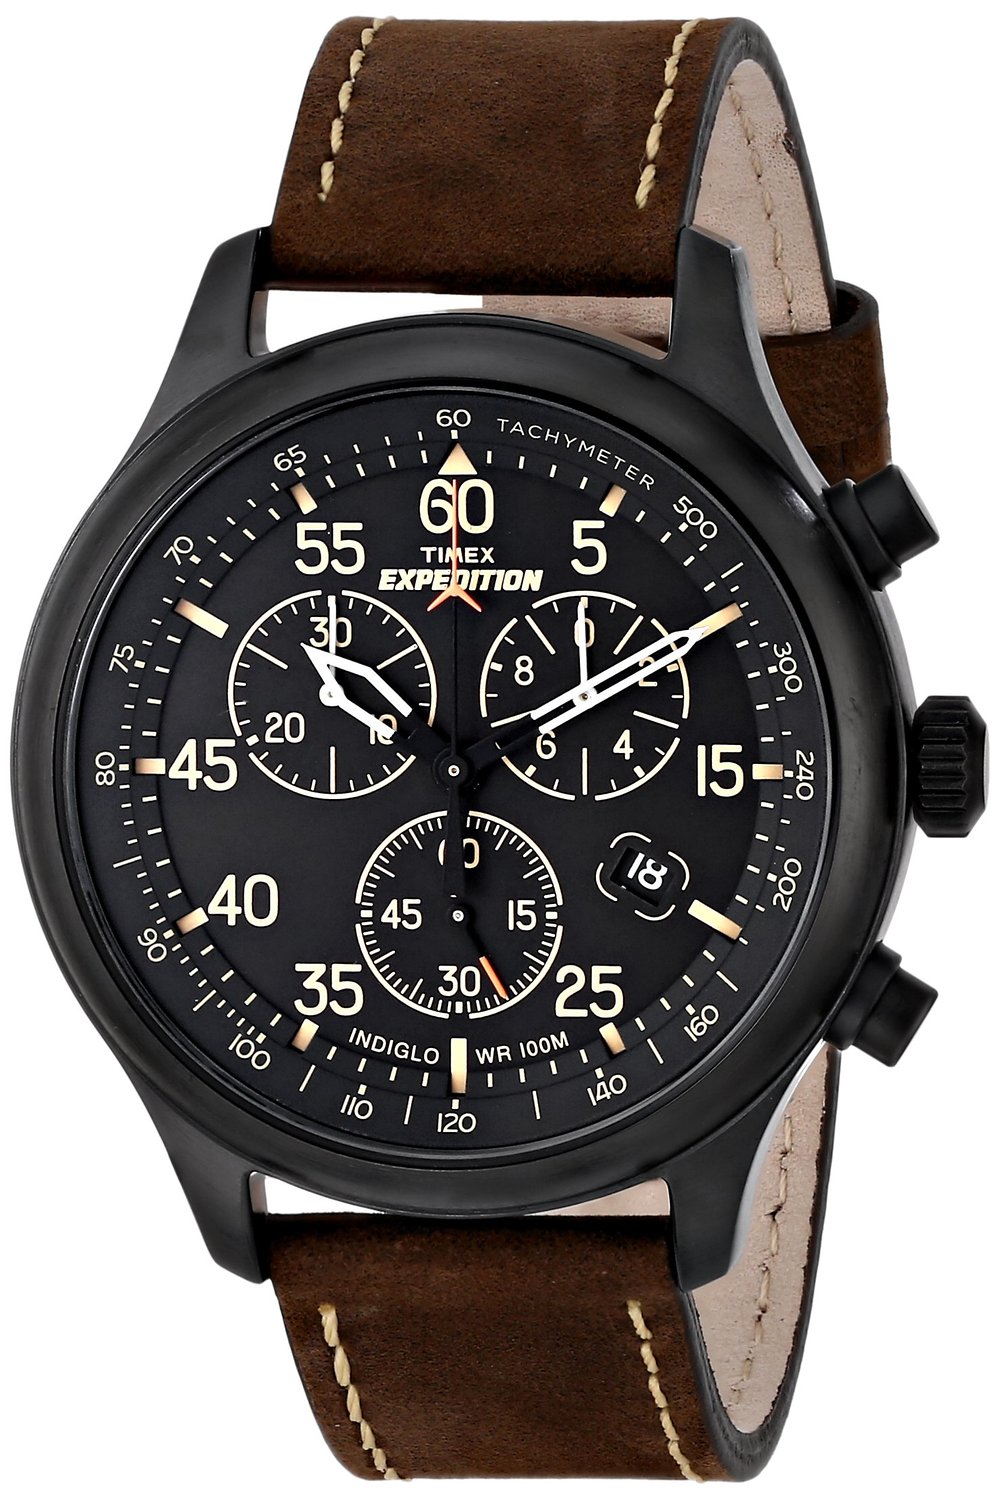 21 Most Popular Chronograph Watches For Men - The Watch Blog